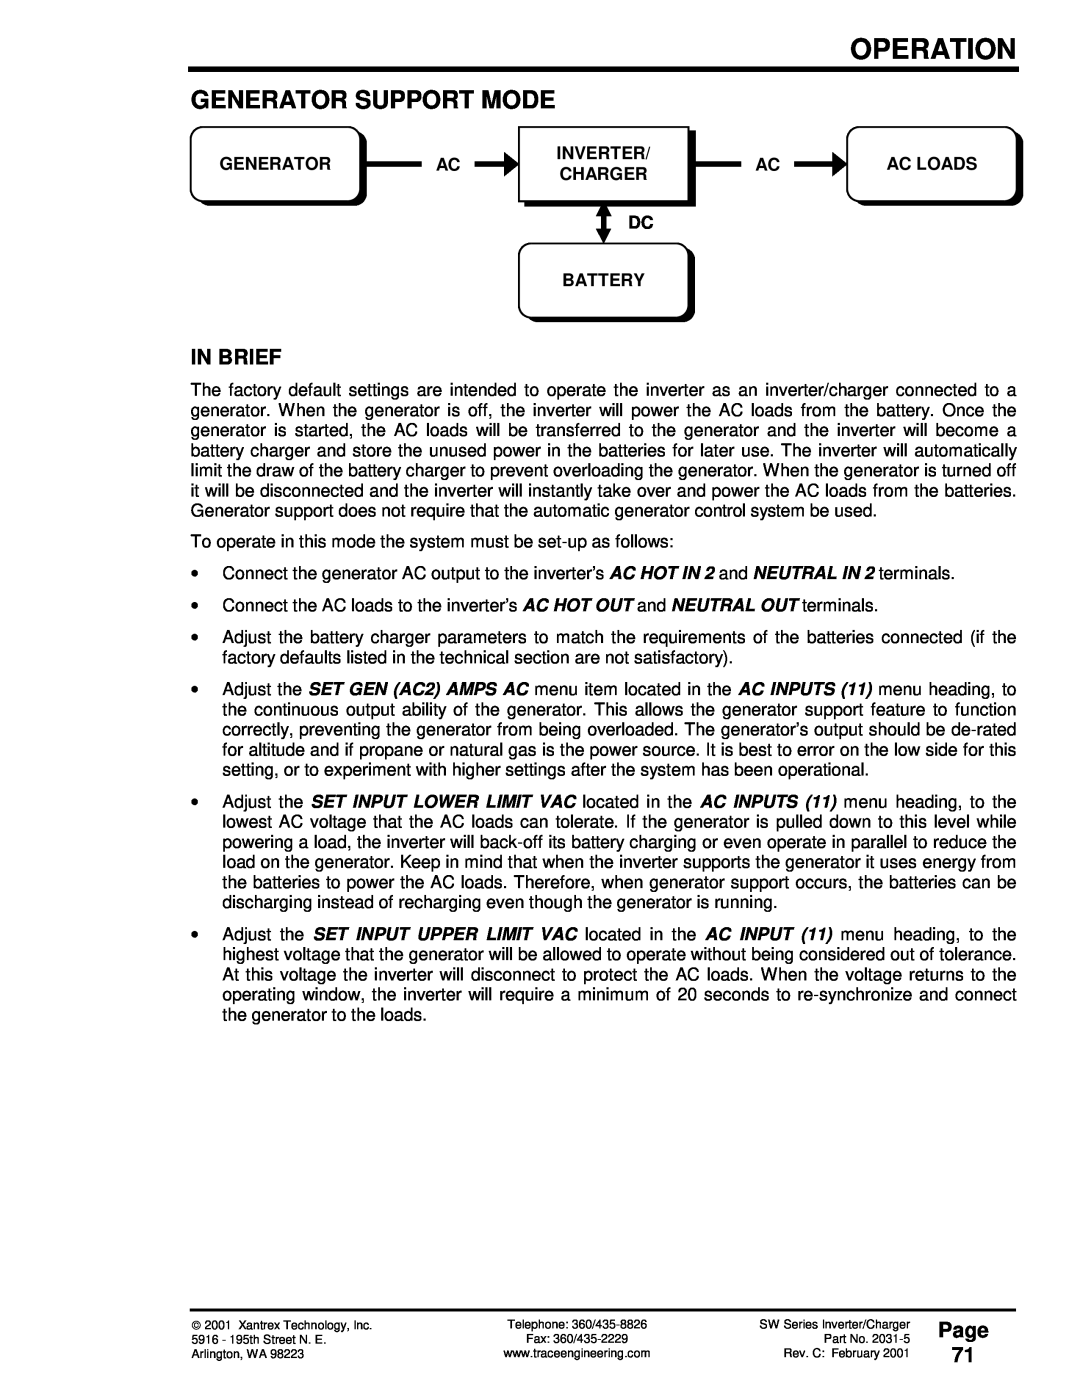 Xantrex Technology SW Series Generator Support Mode, Page 71, Operation, In Brief, Inverter, Charger, Battery, Ac Loads 